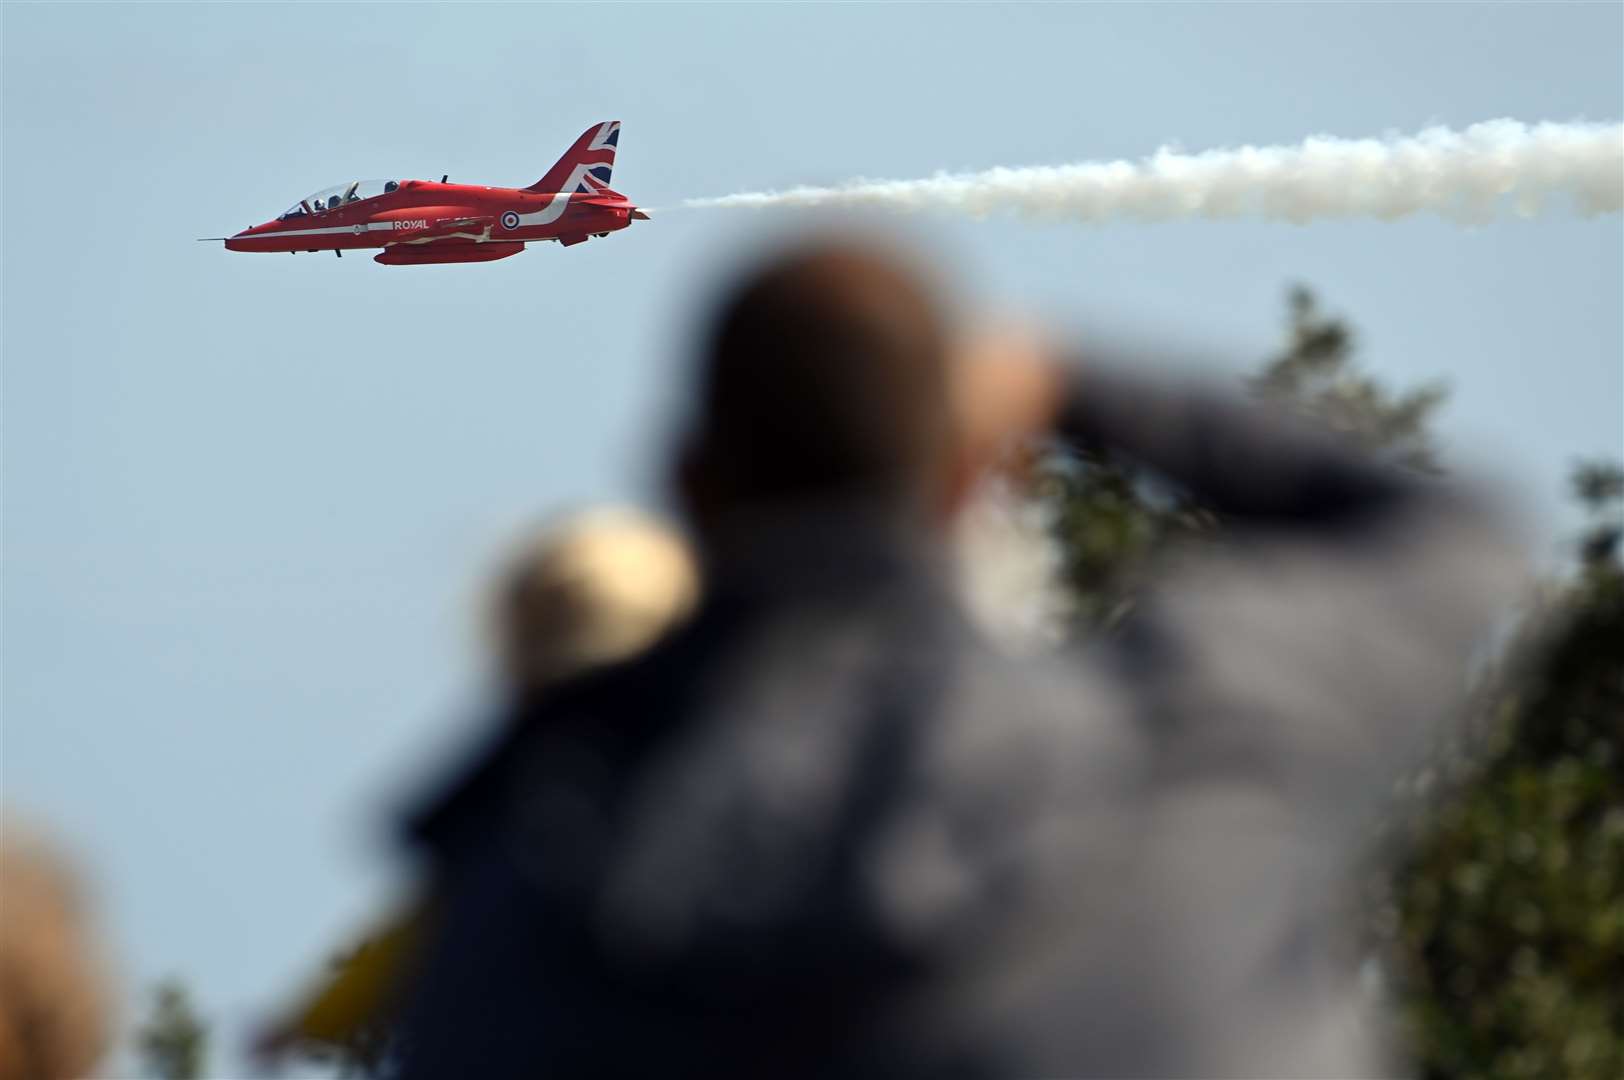 Red Arrows display team in action over Folkestone. Picture: Barry Goodwin